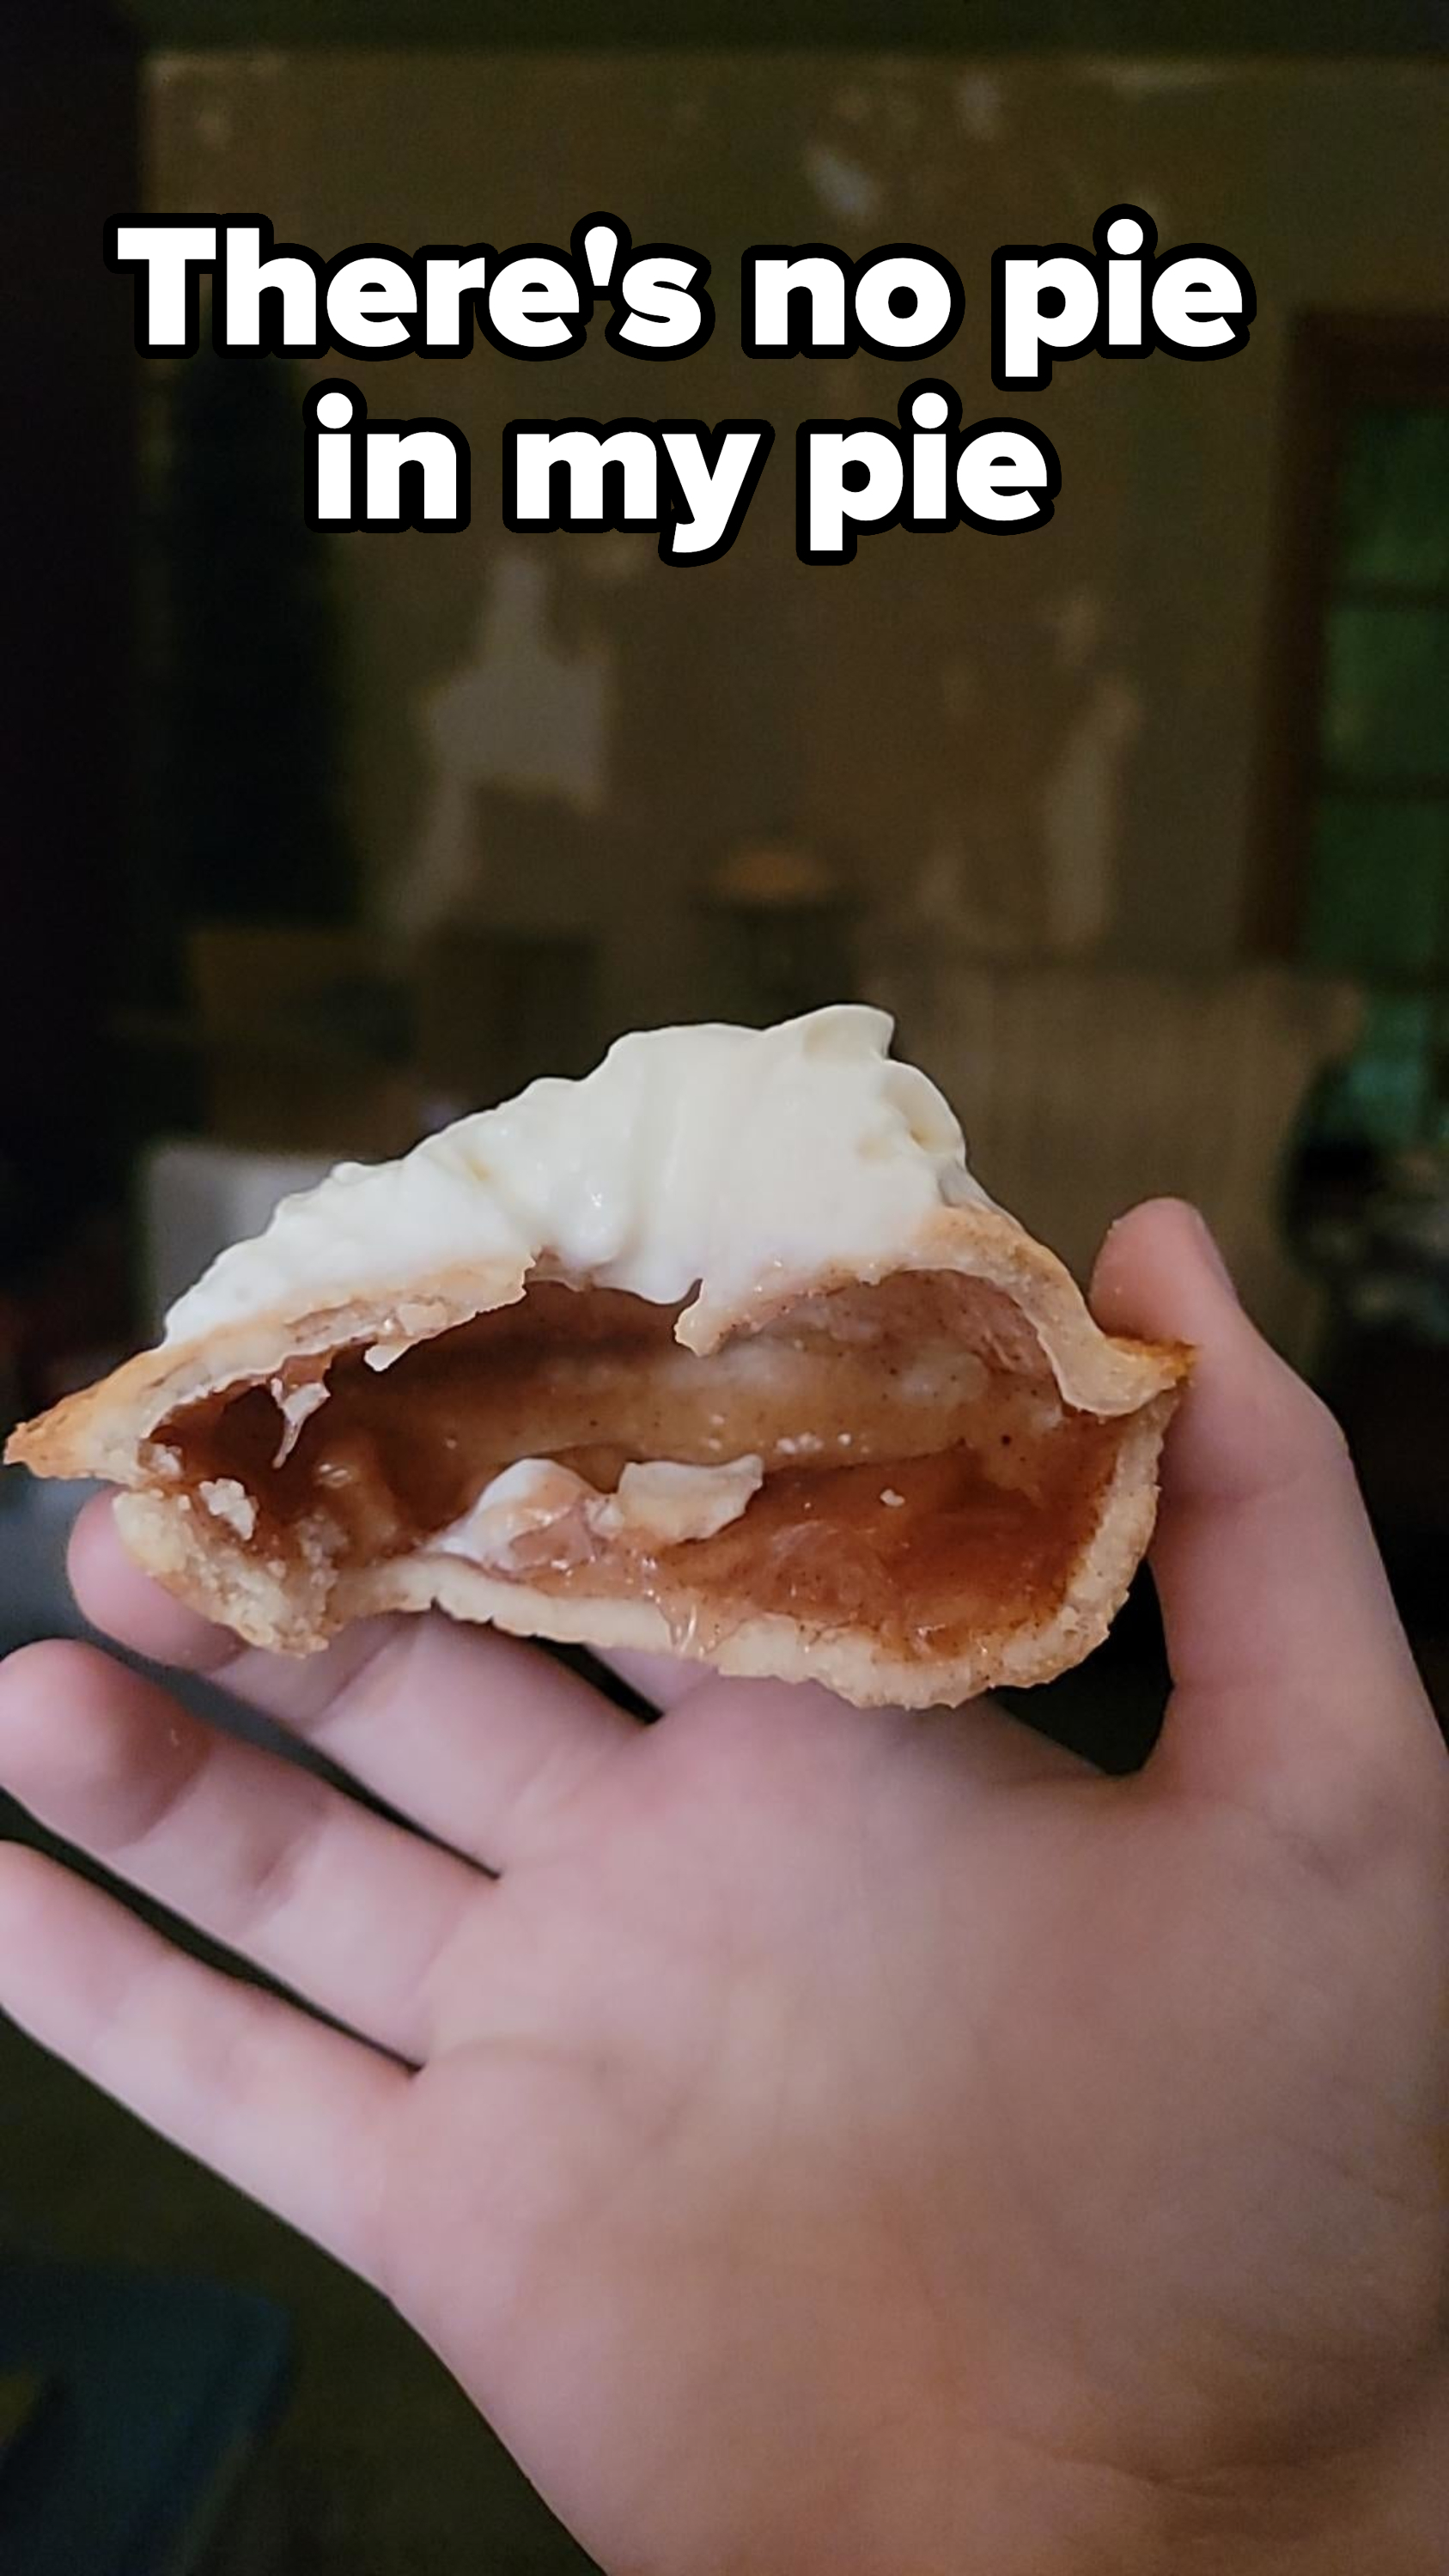 &quot;There&#x27;s no pie in my pie&quot; showing a slice of pie with very little filling